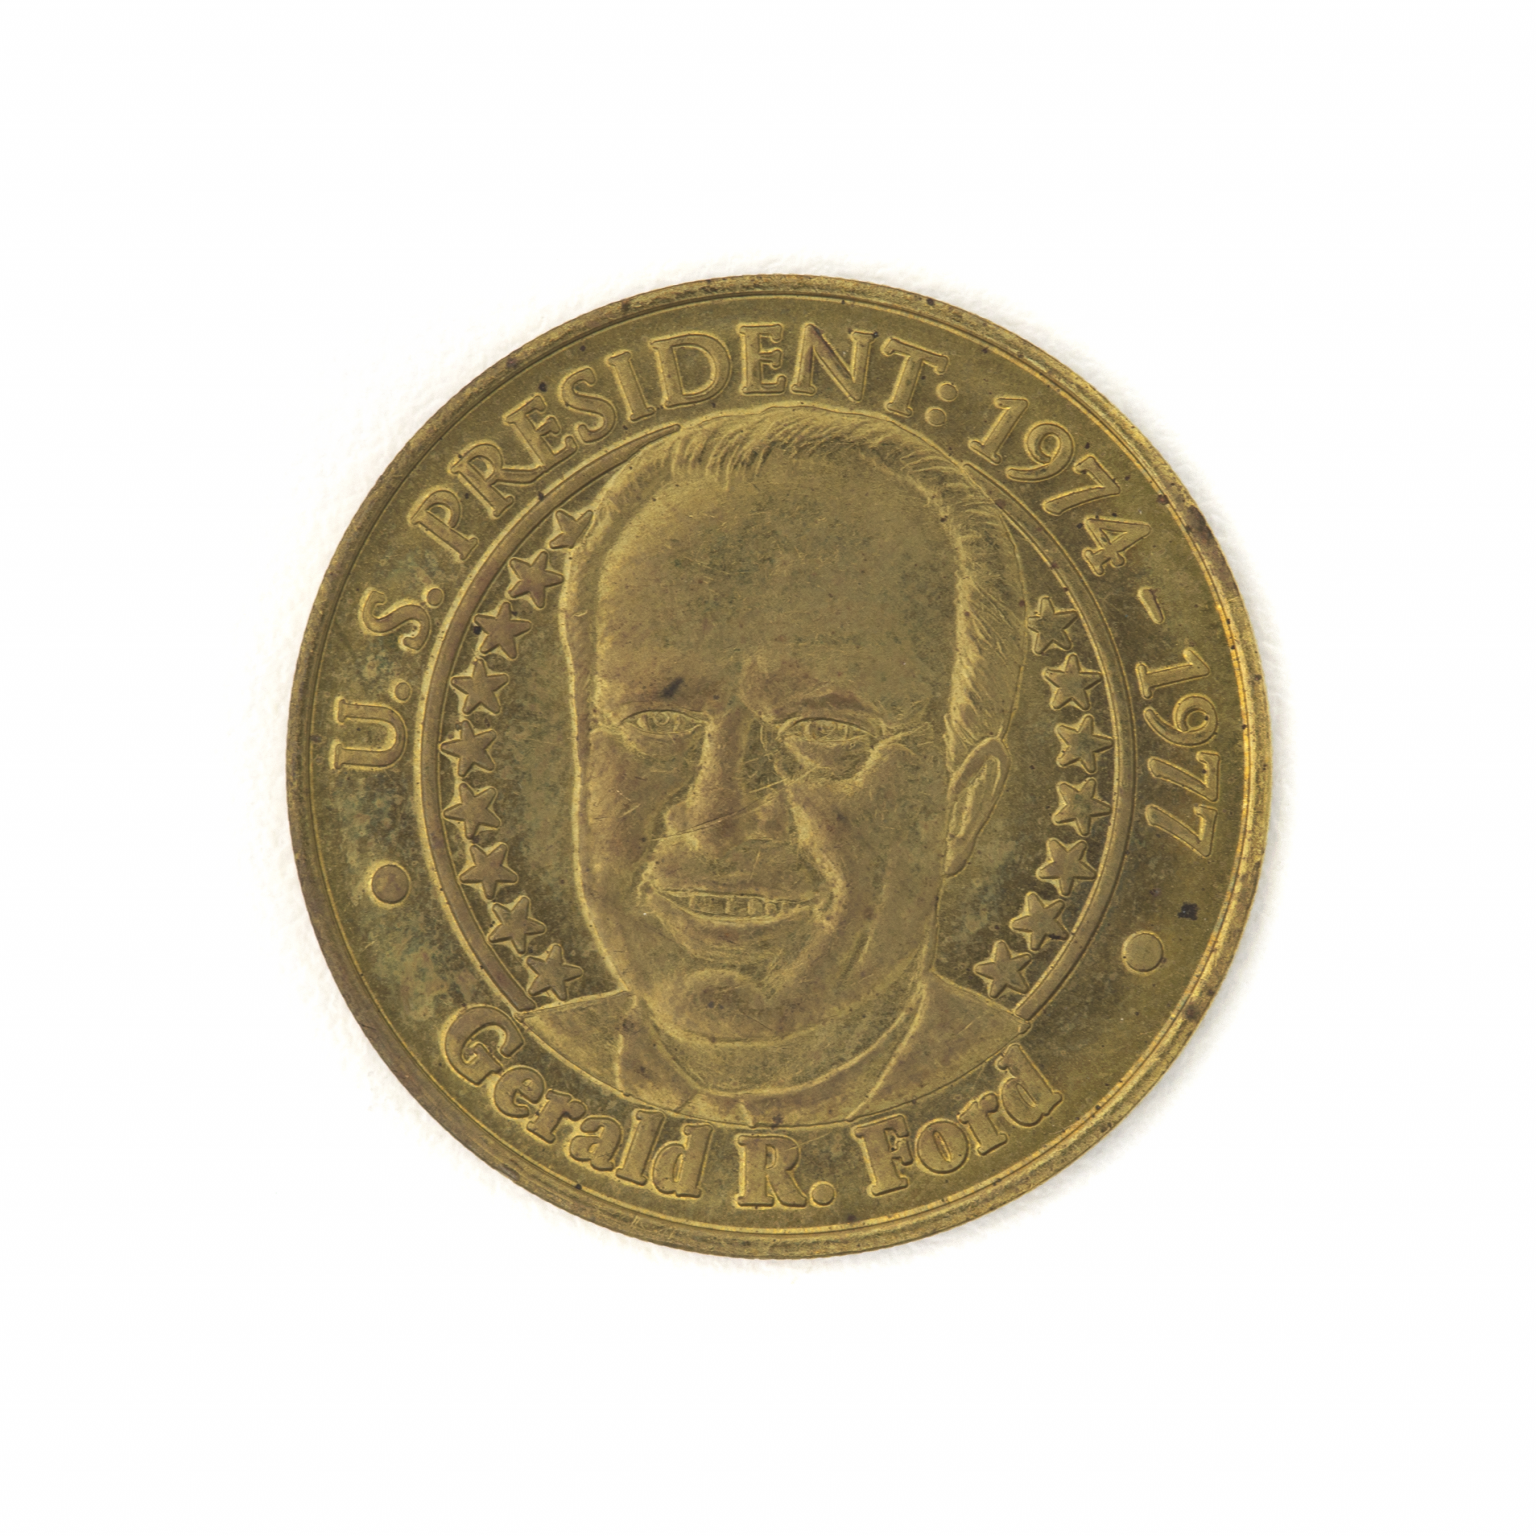 Gerald Ford U.S. President Collectible Coin